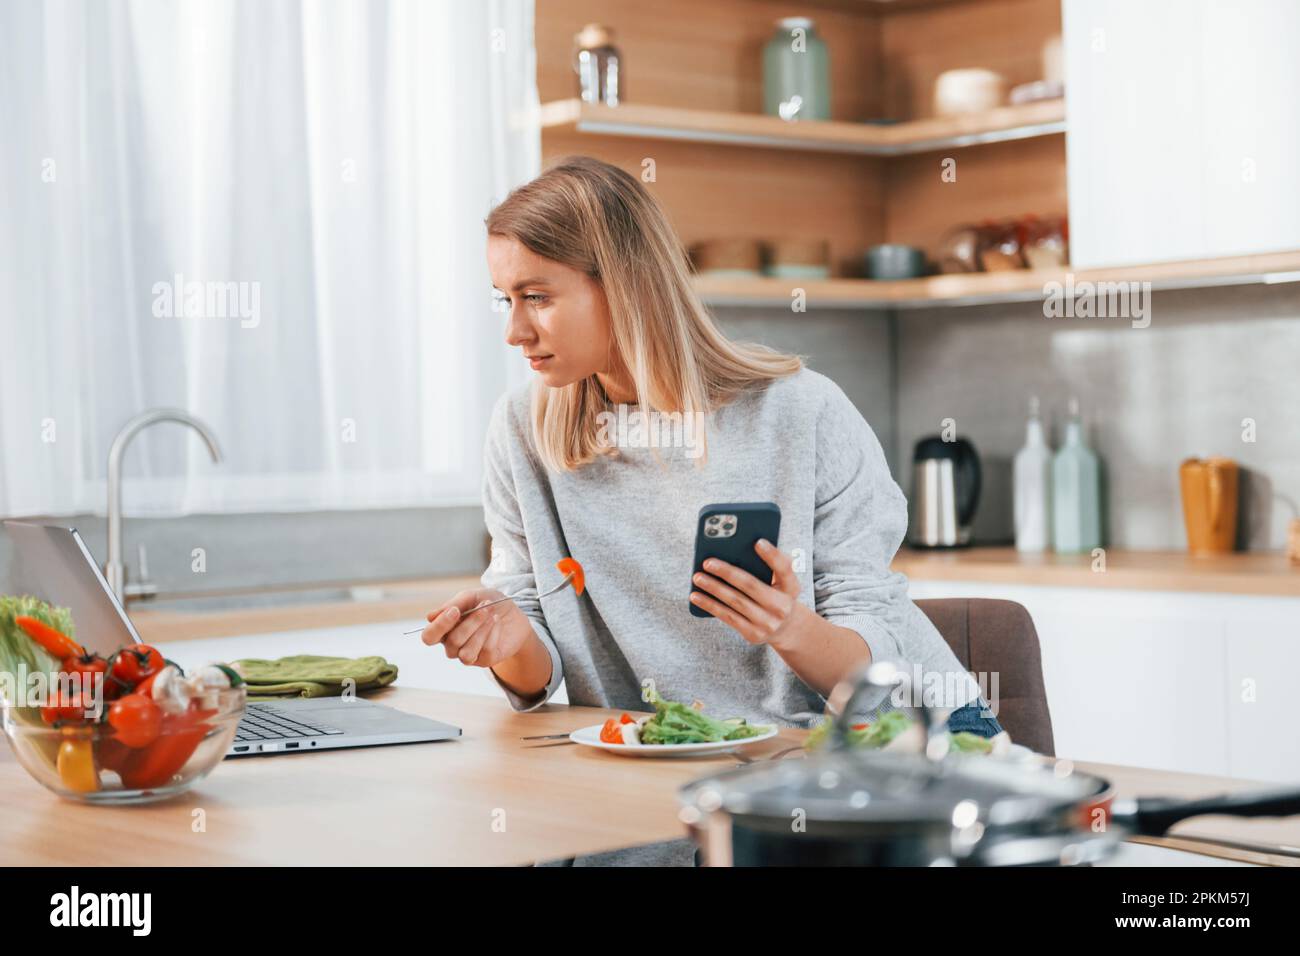 Holding phone. Woman preparing food at home on the modern kitchen. Stock Photo